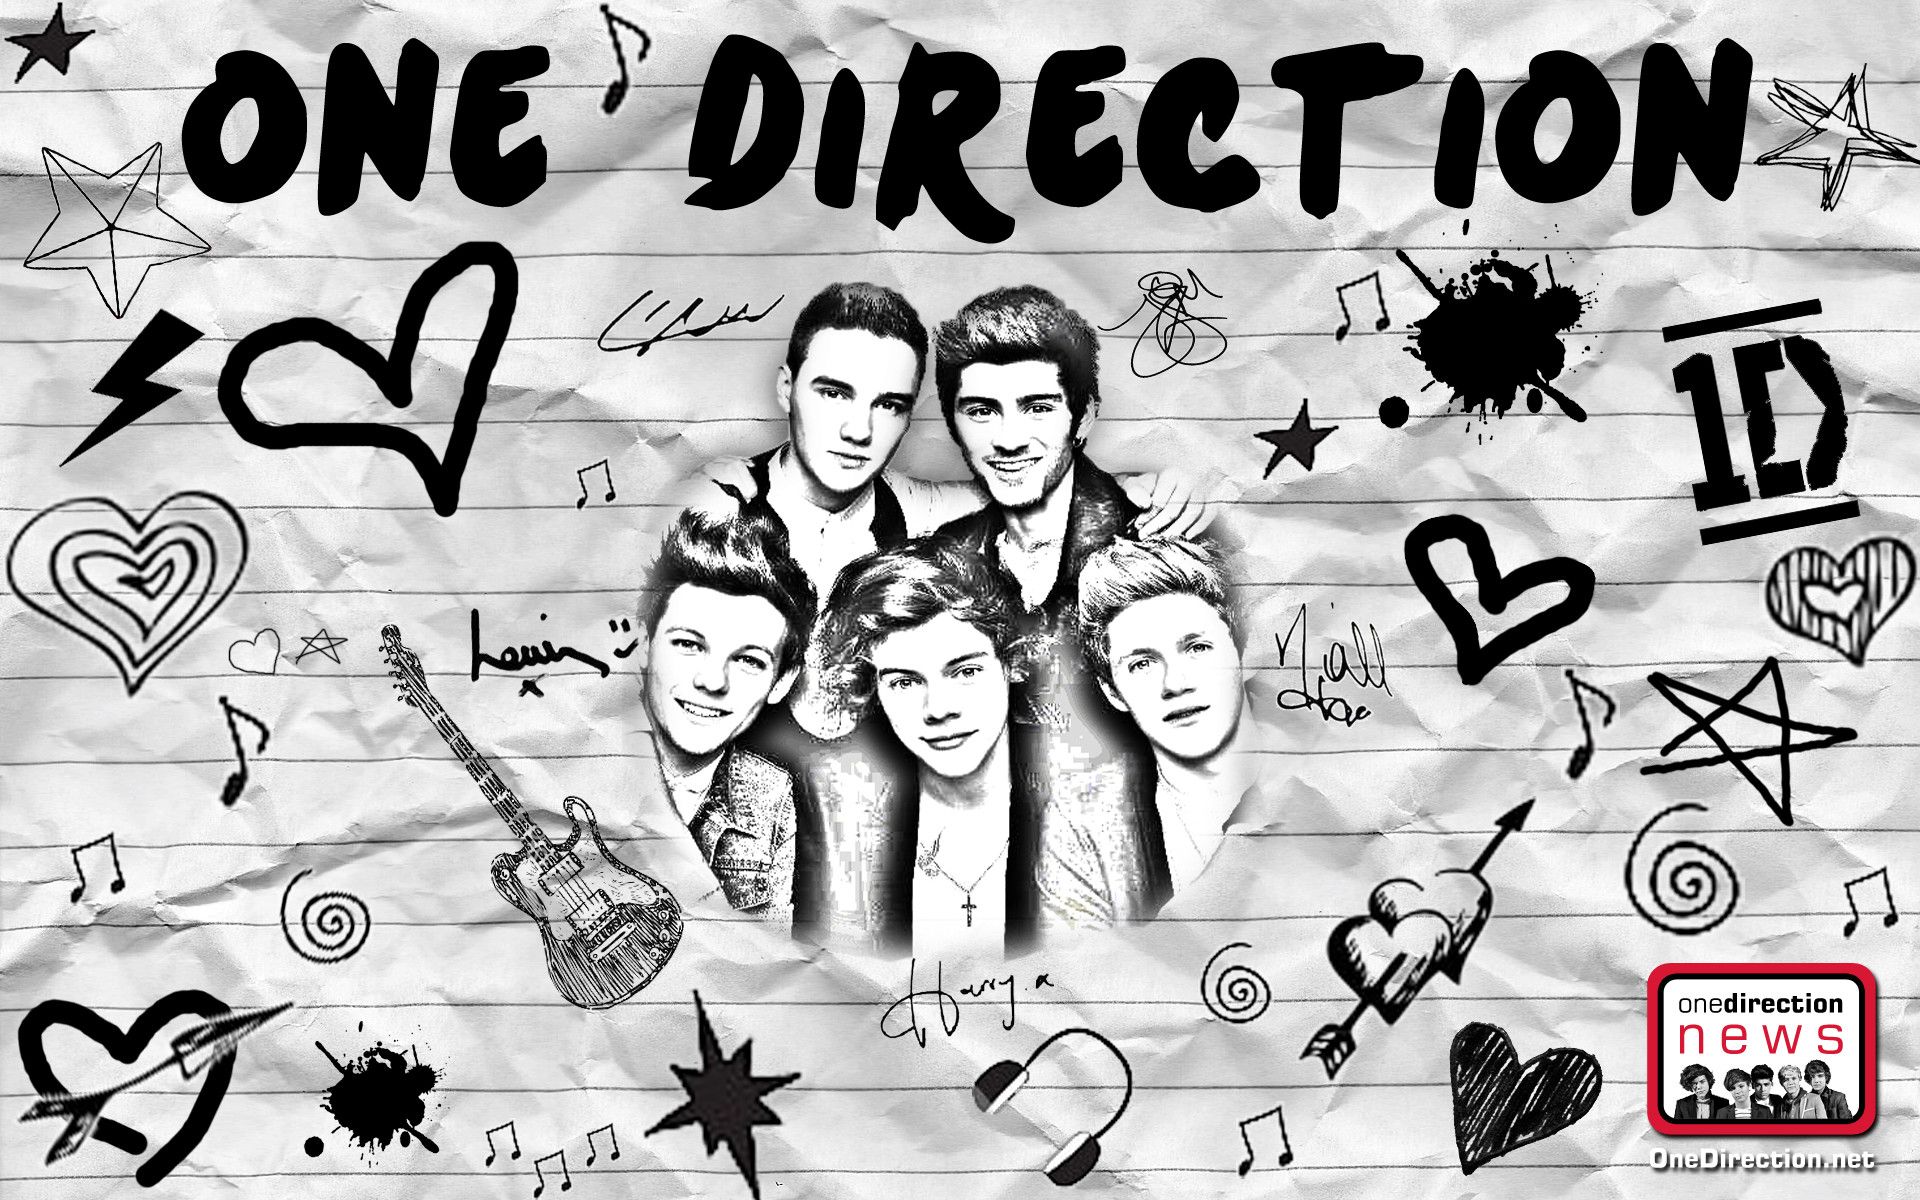 One Direction 2014 Wallpaper For iPad Image Gallery, Picture